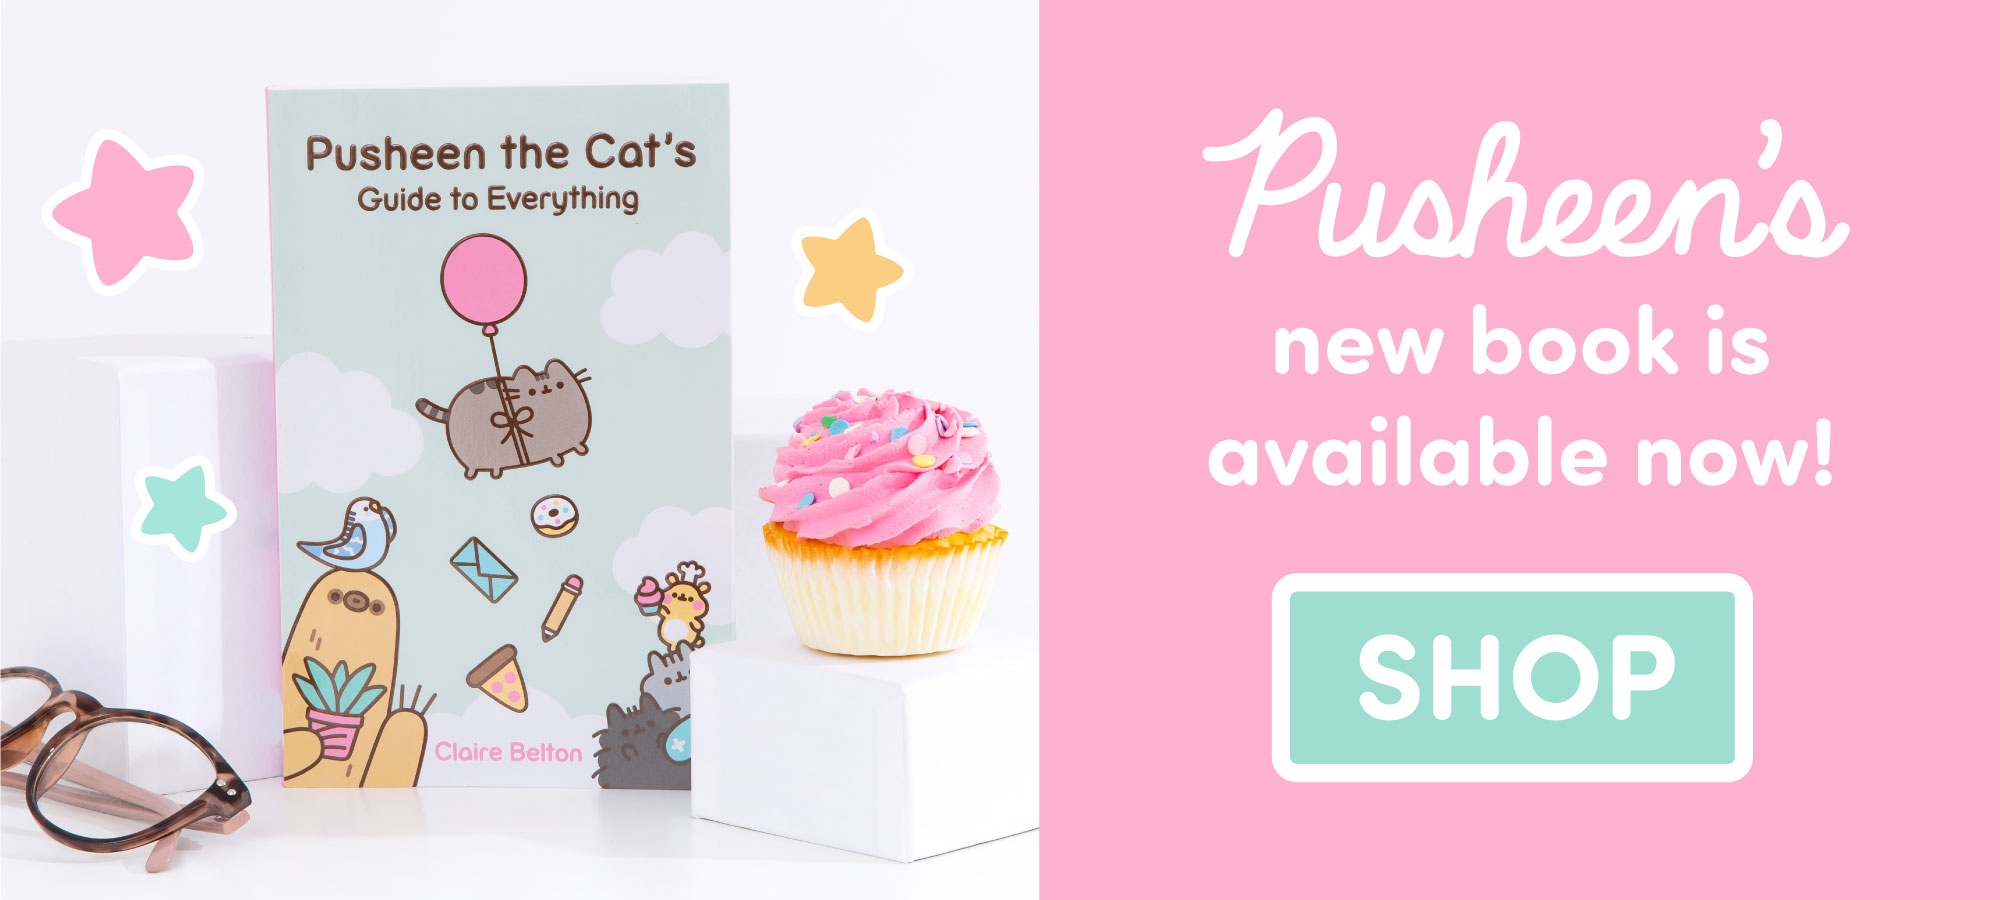 Pusheen's new book is available now! Shop! Image of 